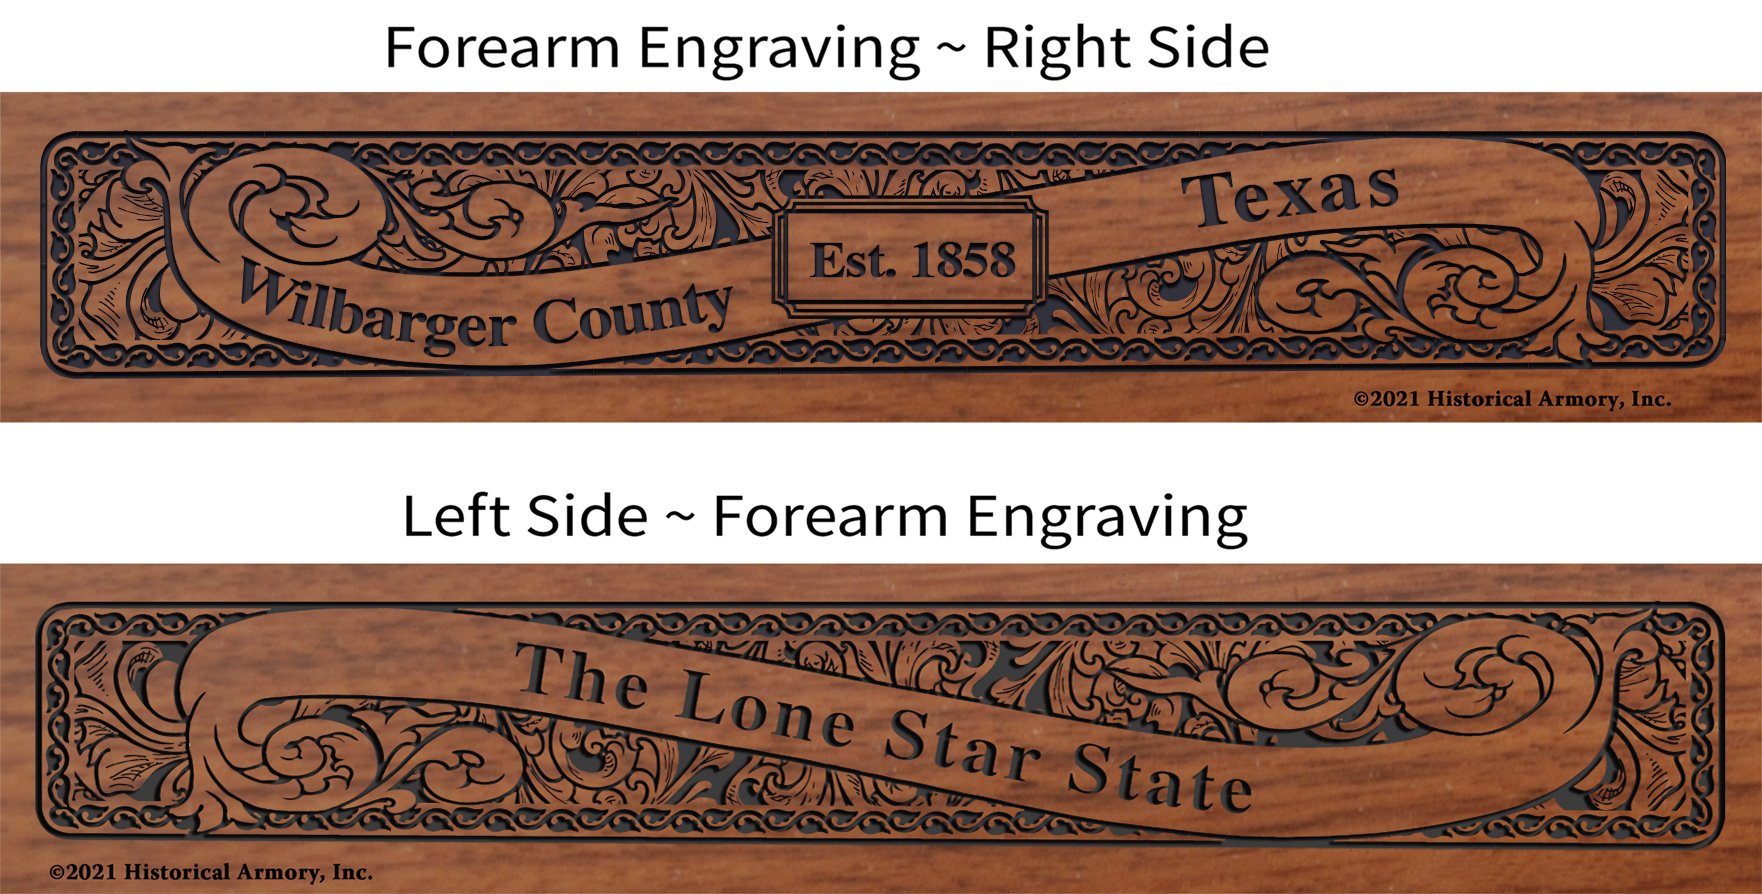 Wilbarger County Texas Establishment and Motto History Engraved Rifle Forearm